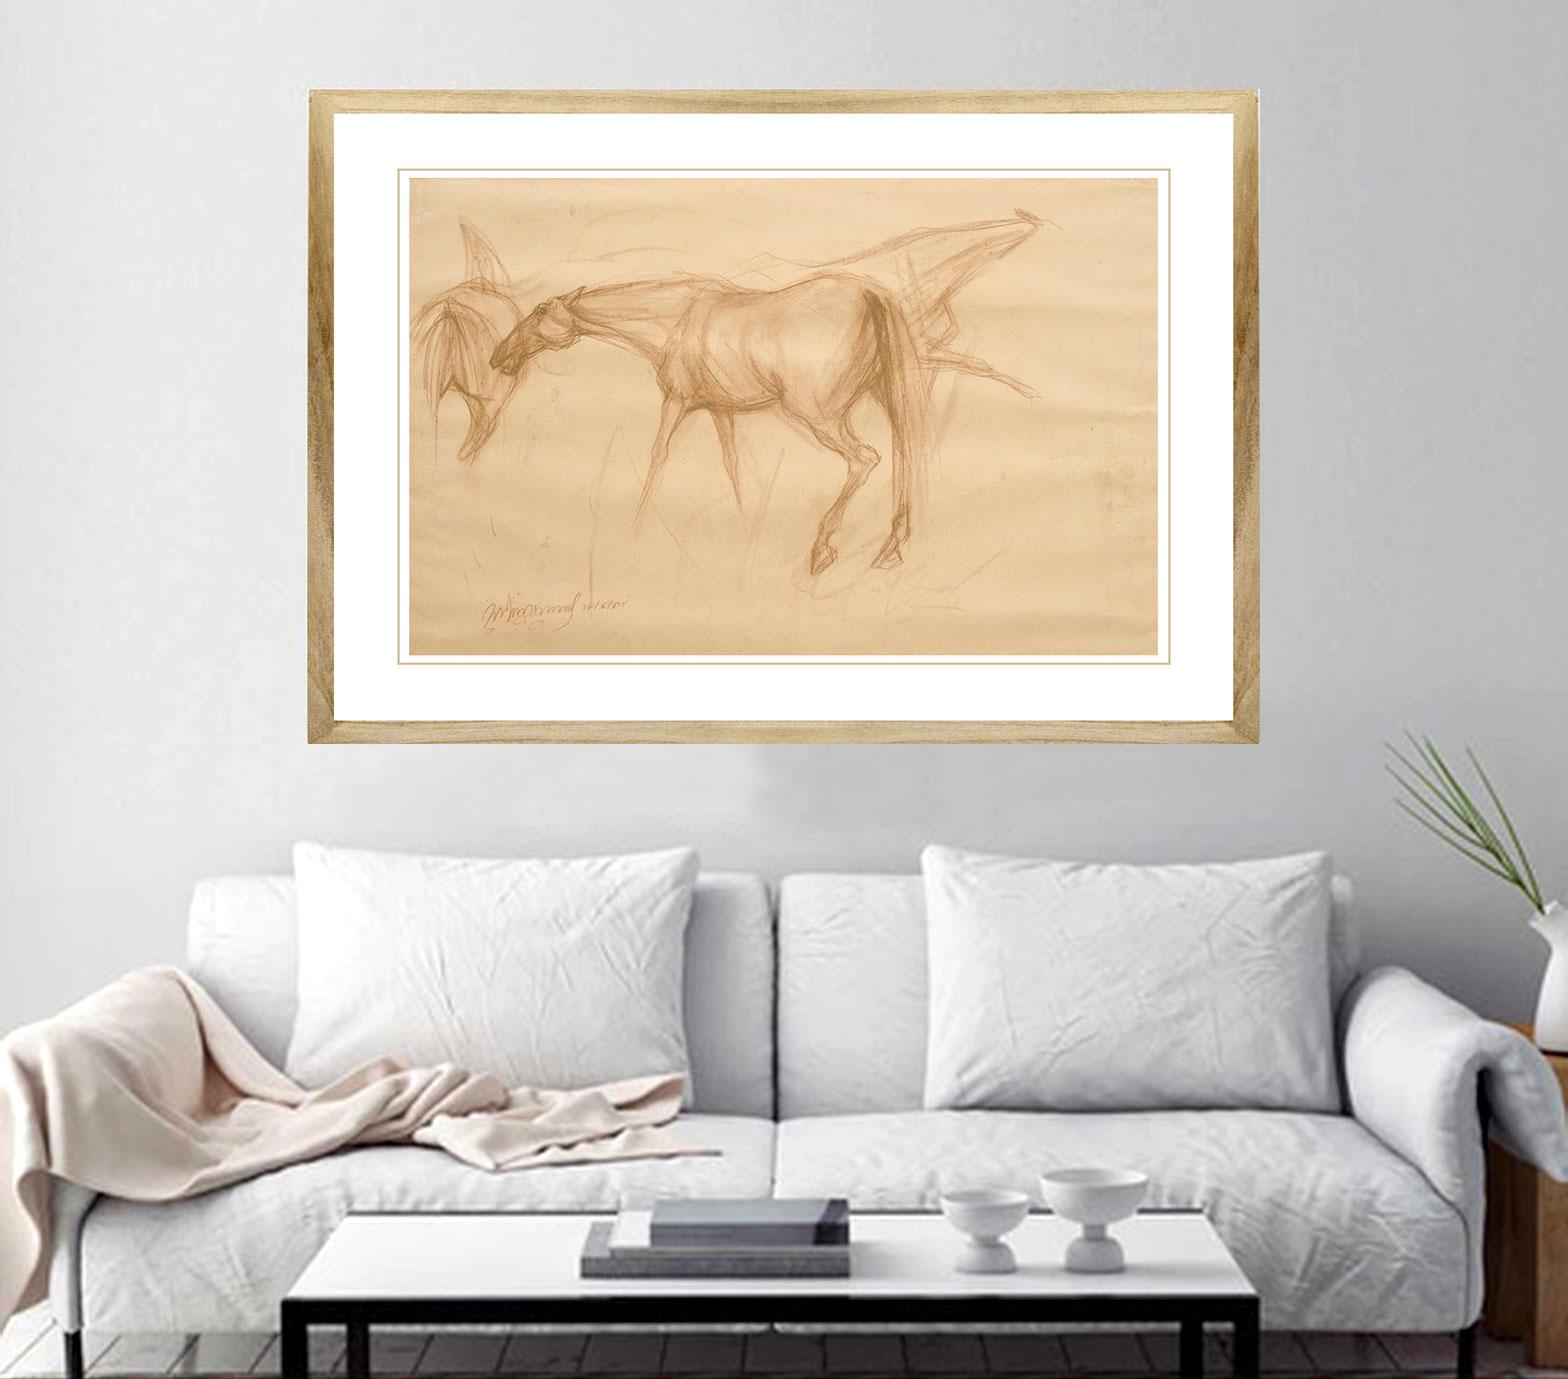 Sunil Das - Early Horses II - 21 x 32 inches (unframed size)
Conte on Paper
Inclusive of shipment in ready to hang form.

Sunil Das was one of India's most important postmodernist painters and rose to prominence through his drawings of horses. He